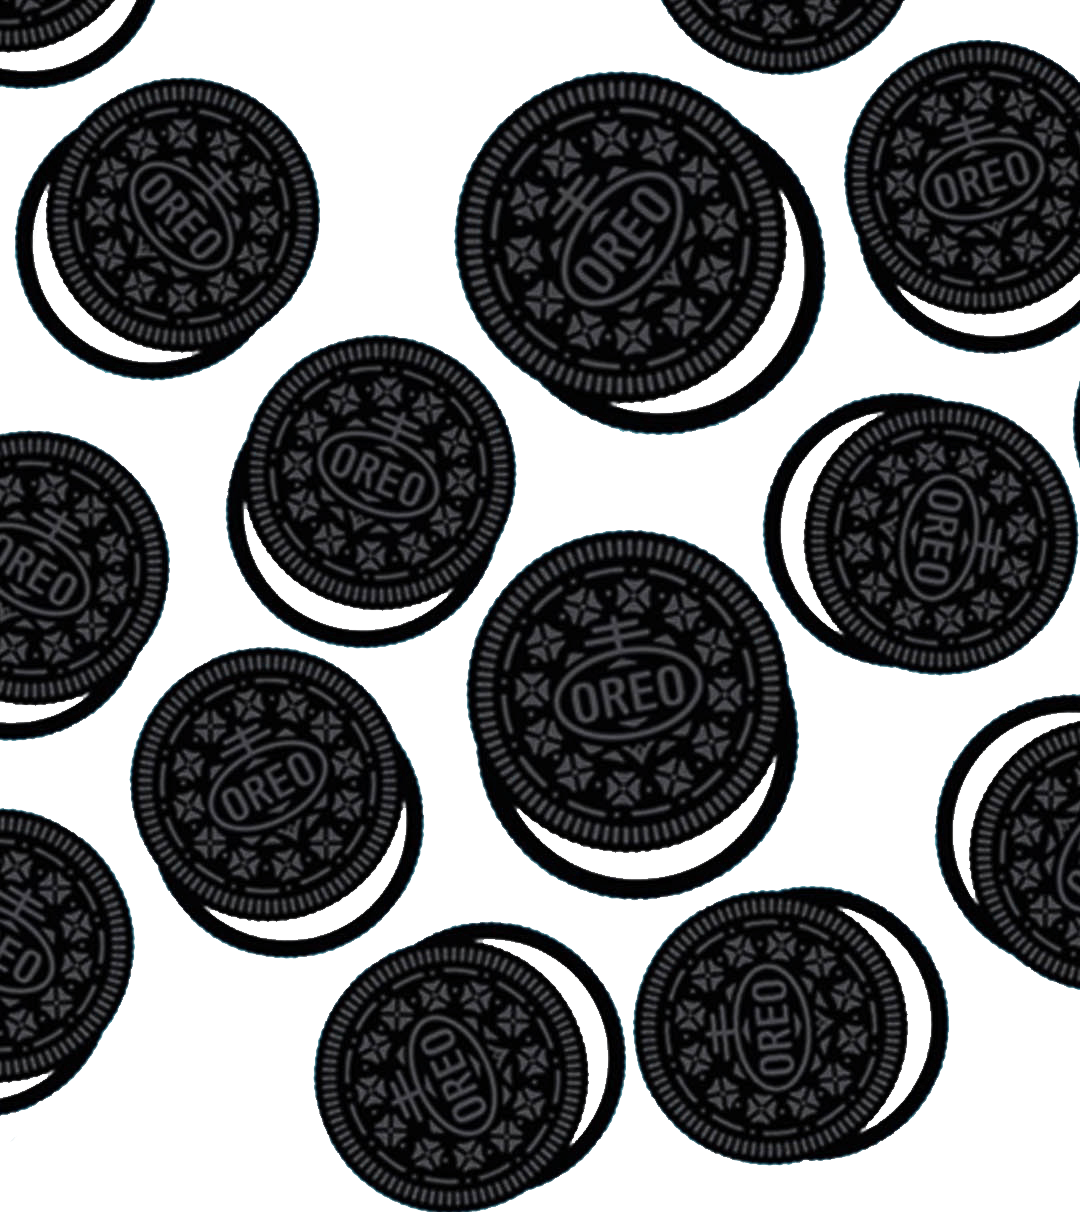 Cookies Wallpaper 4K, Supreme, Oreo, Red background